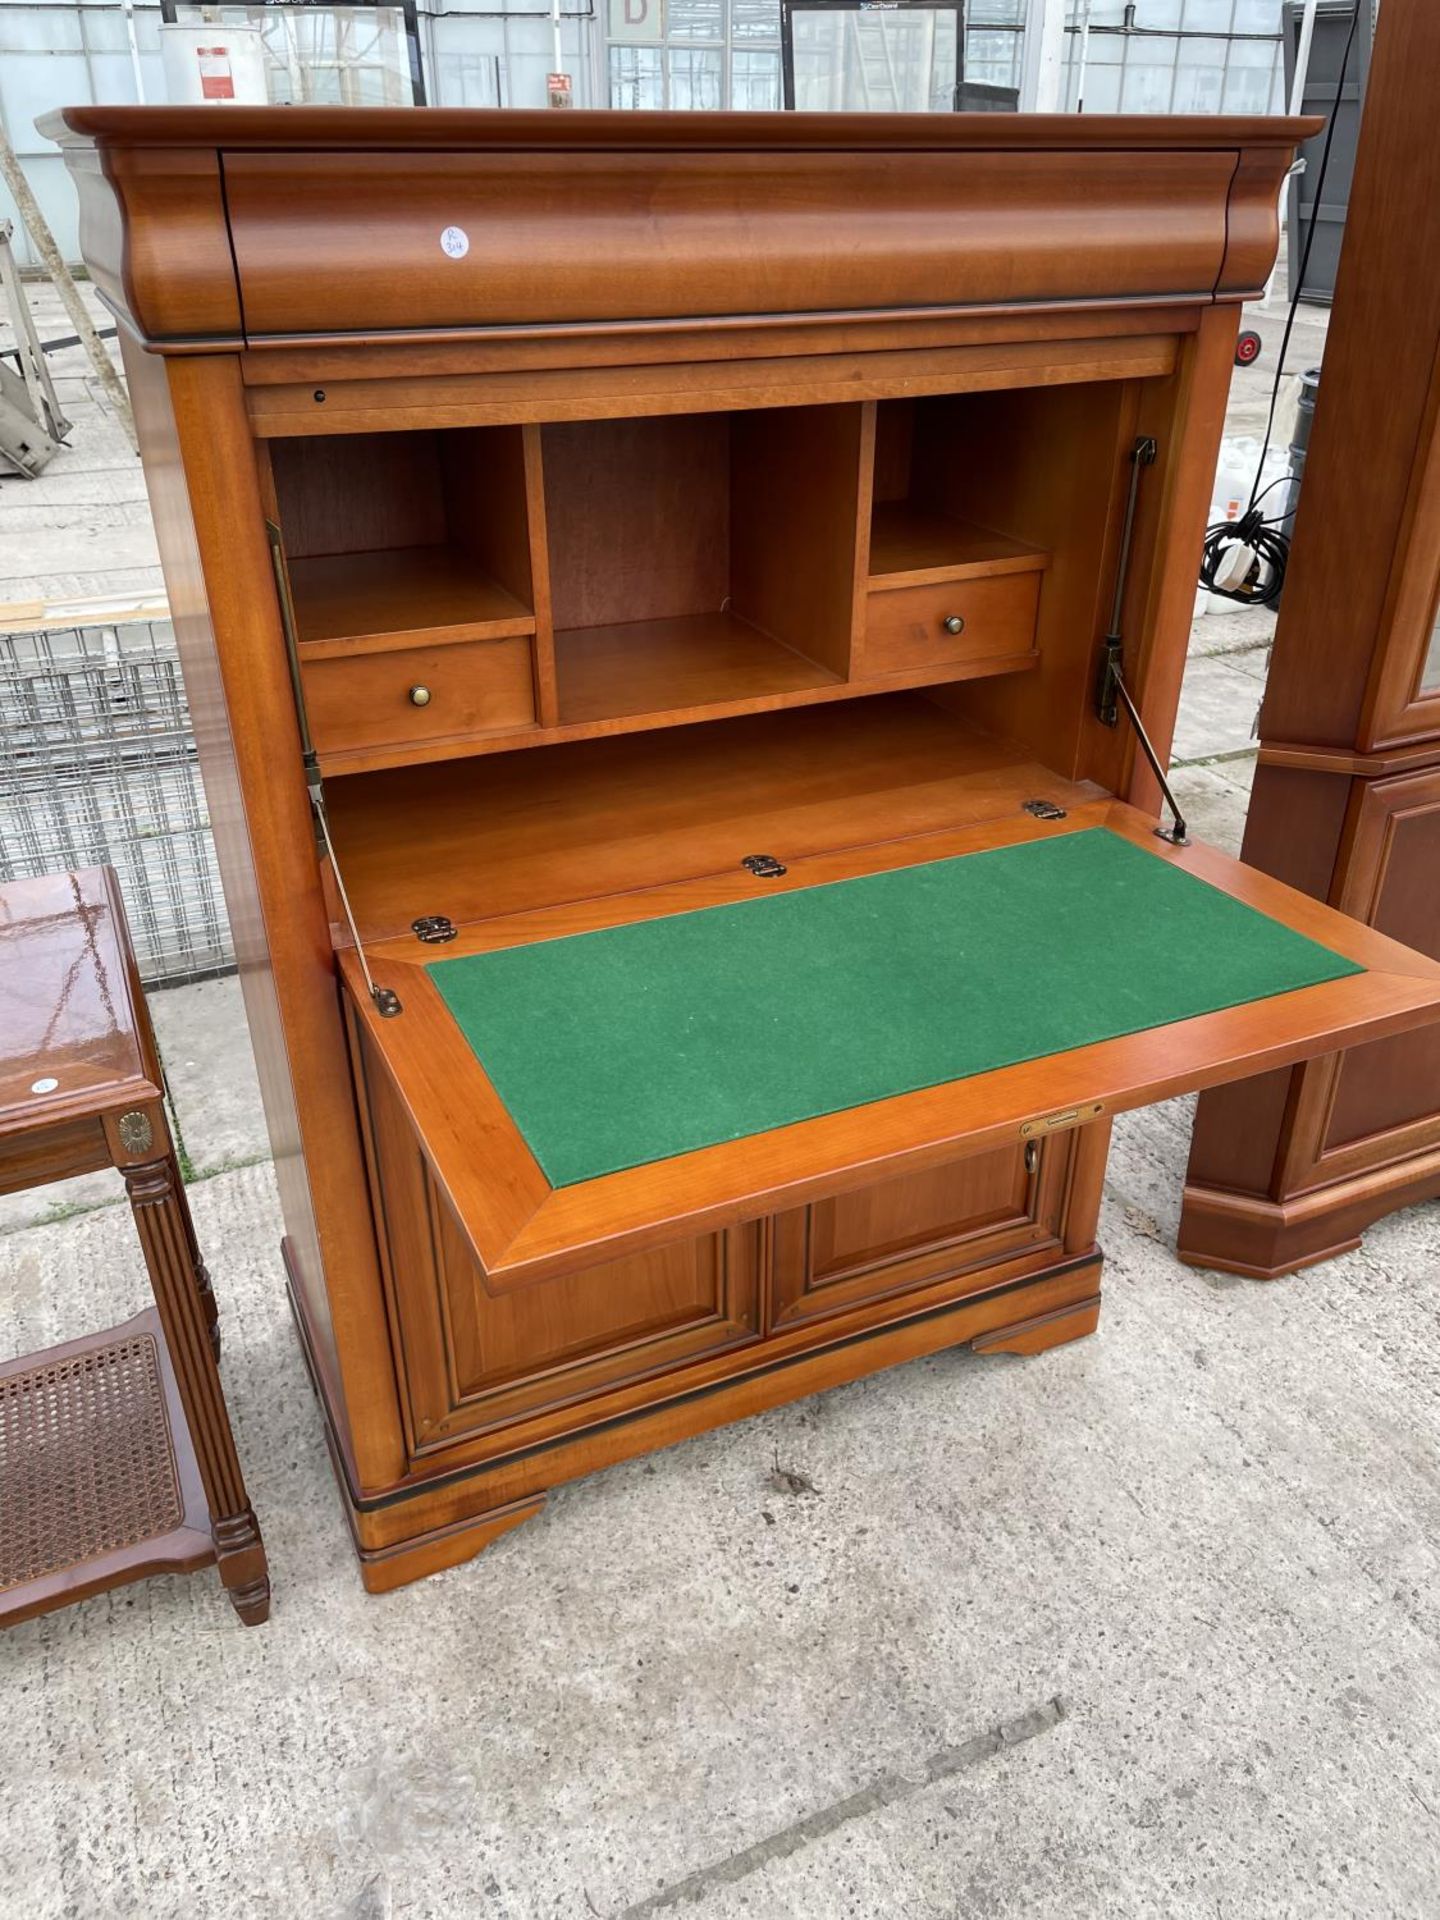 A CHERRY WOOD BUREAU CABINET WITH FALL FRONT, UPPER SECRET DRAWER AND TWO LOWER DOORS - Image 5 of 5